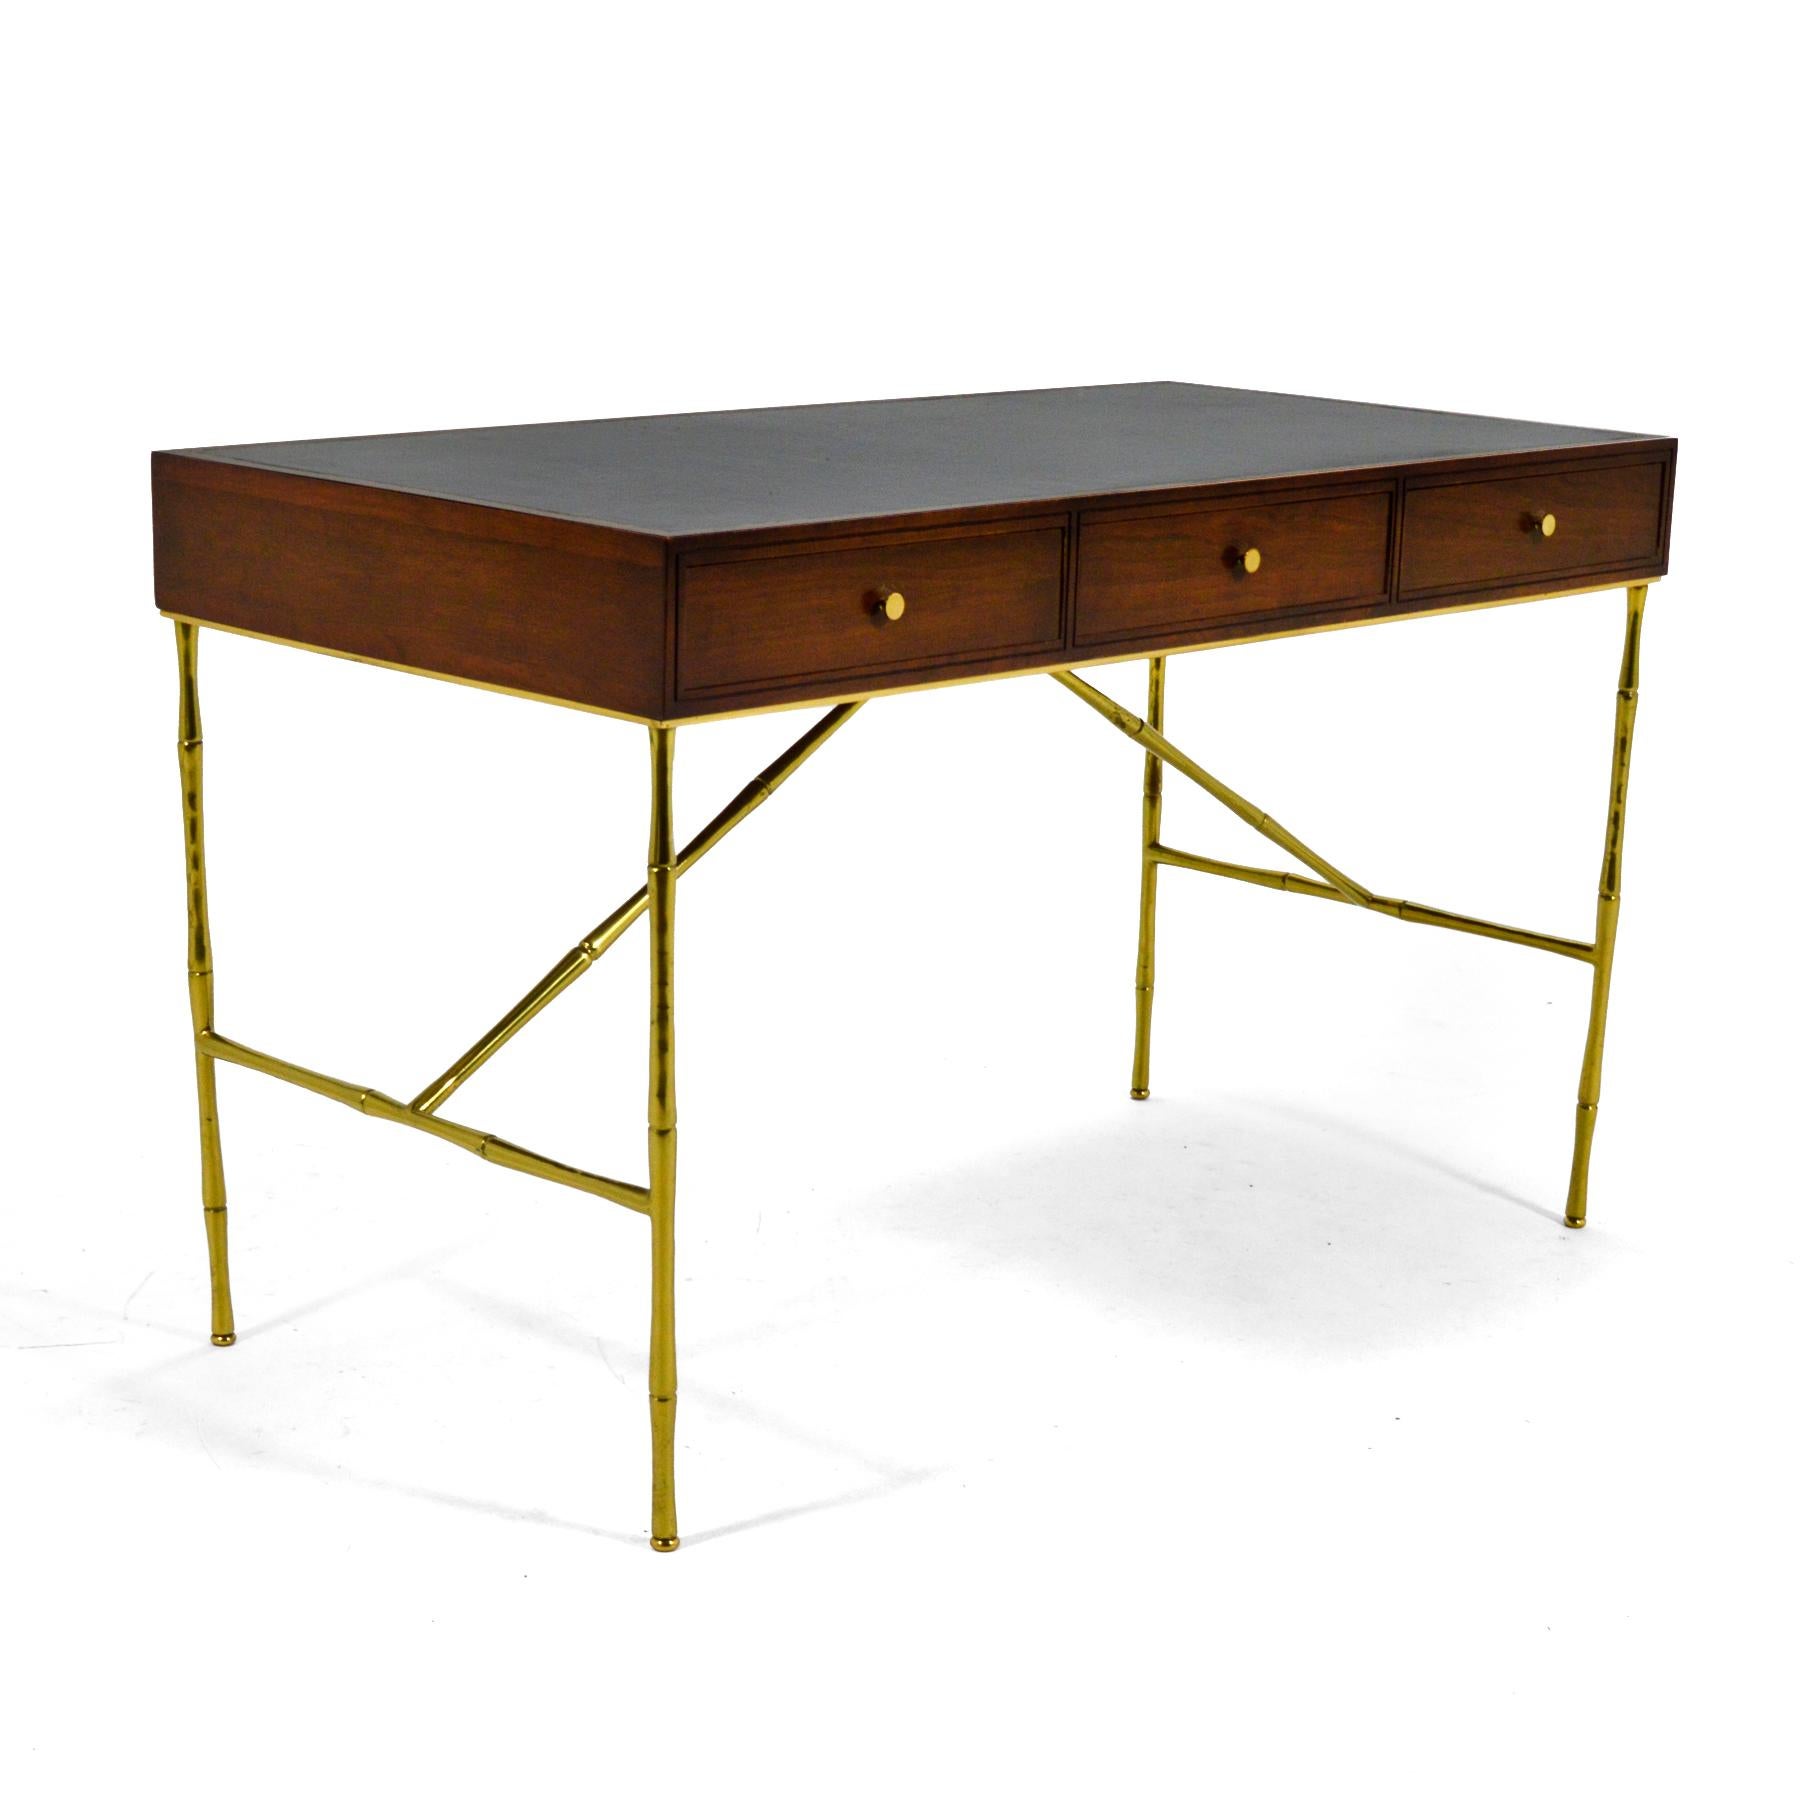 This is simply a stunning Kipp Stewart design executed beautifully by Directional. The wonderfully proportioned desk features a rich wood case with a leather inlaid top that is supported by legs of brass shaped like bamboo. It has three deep leather